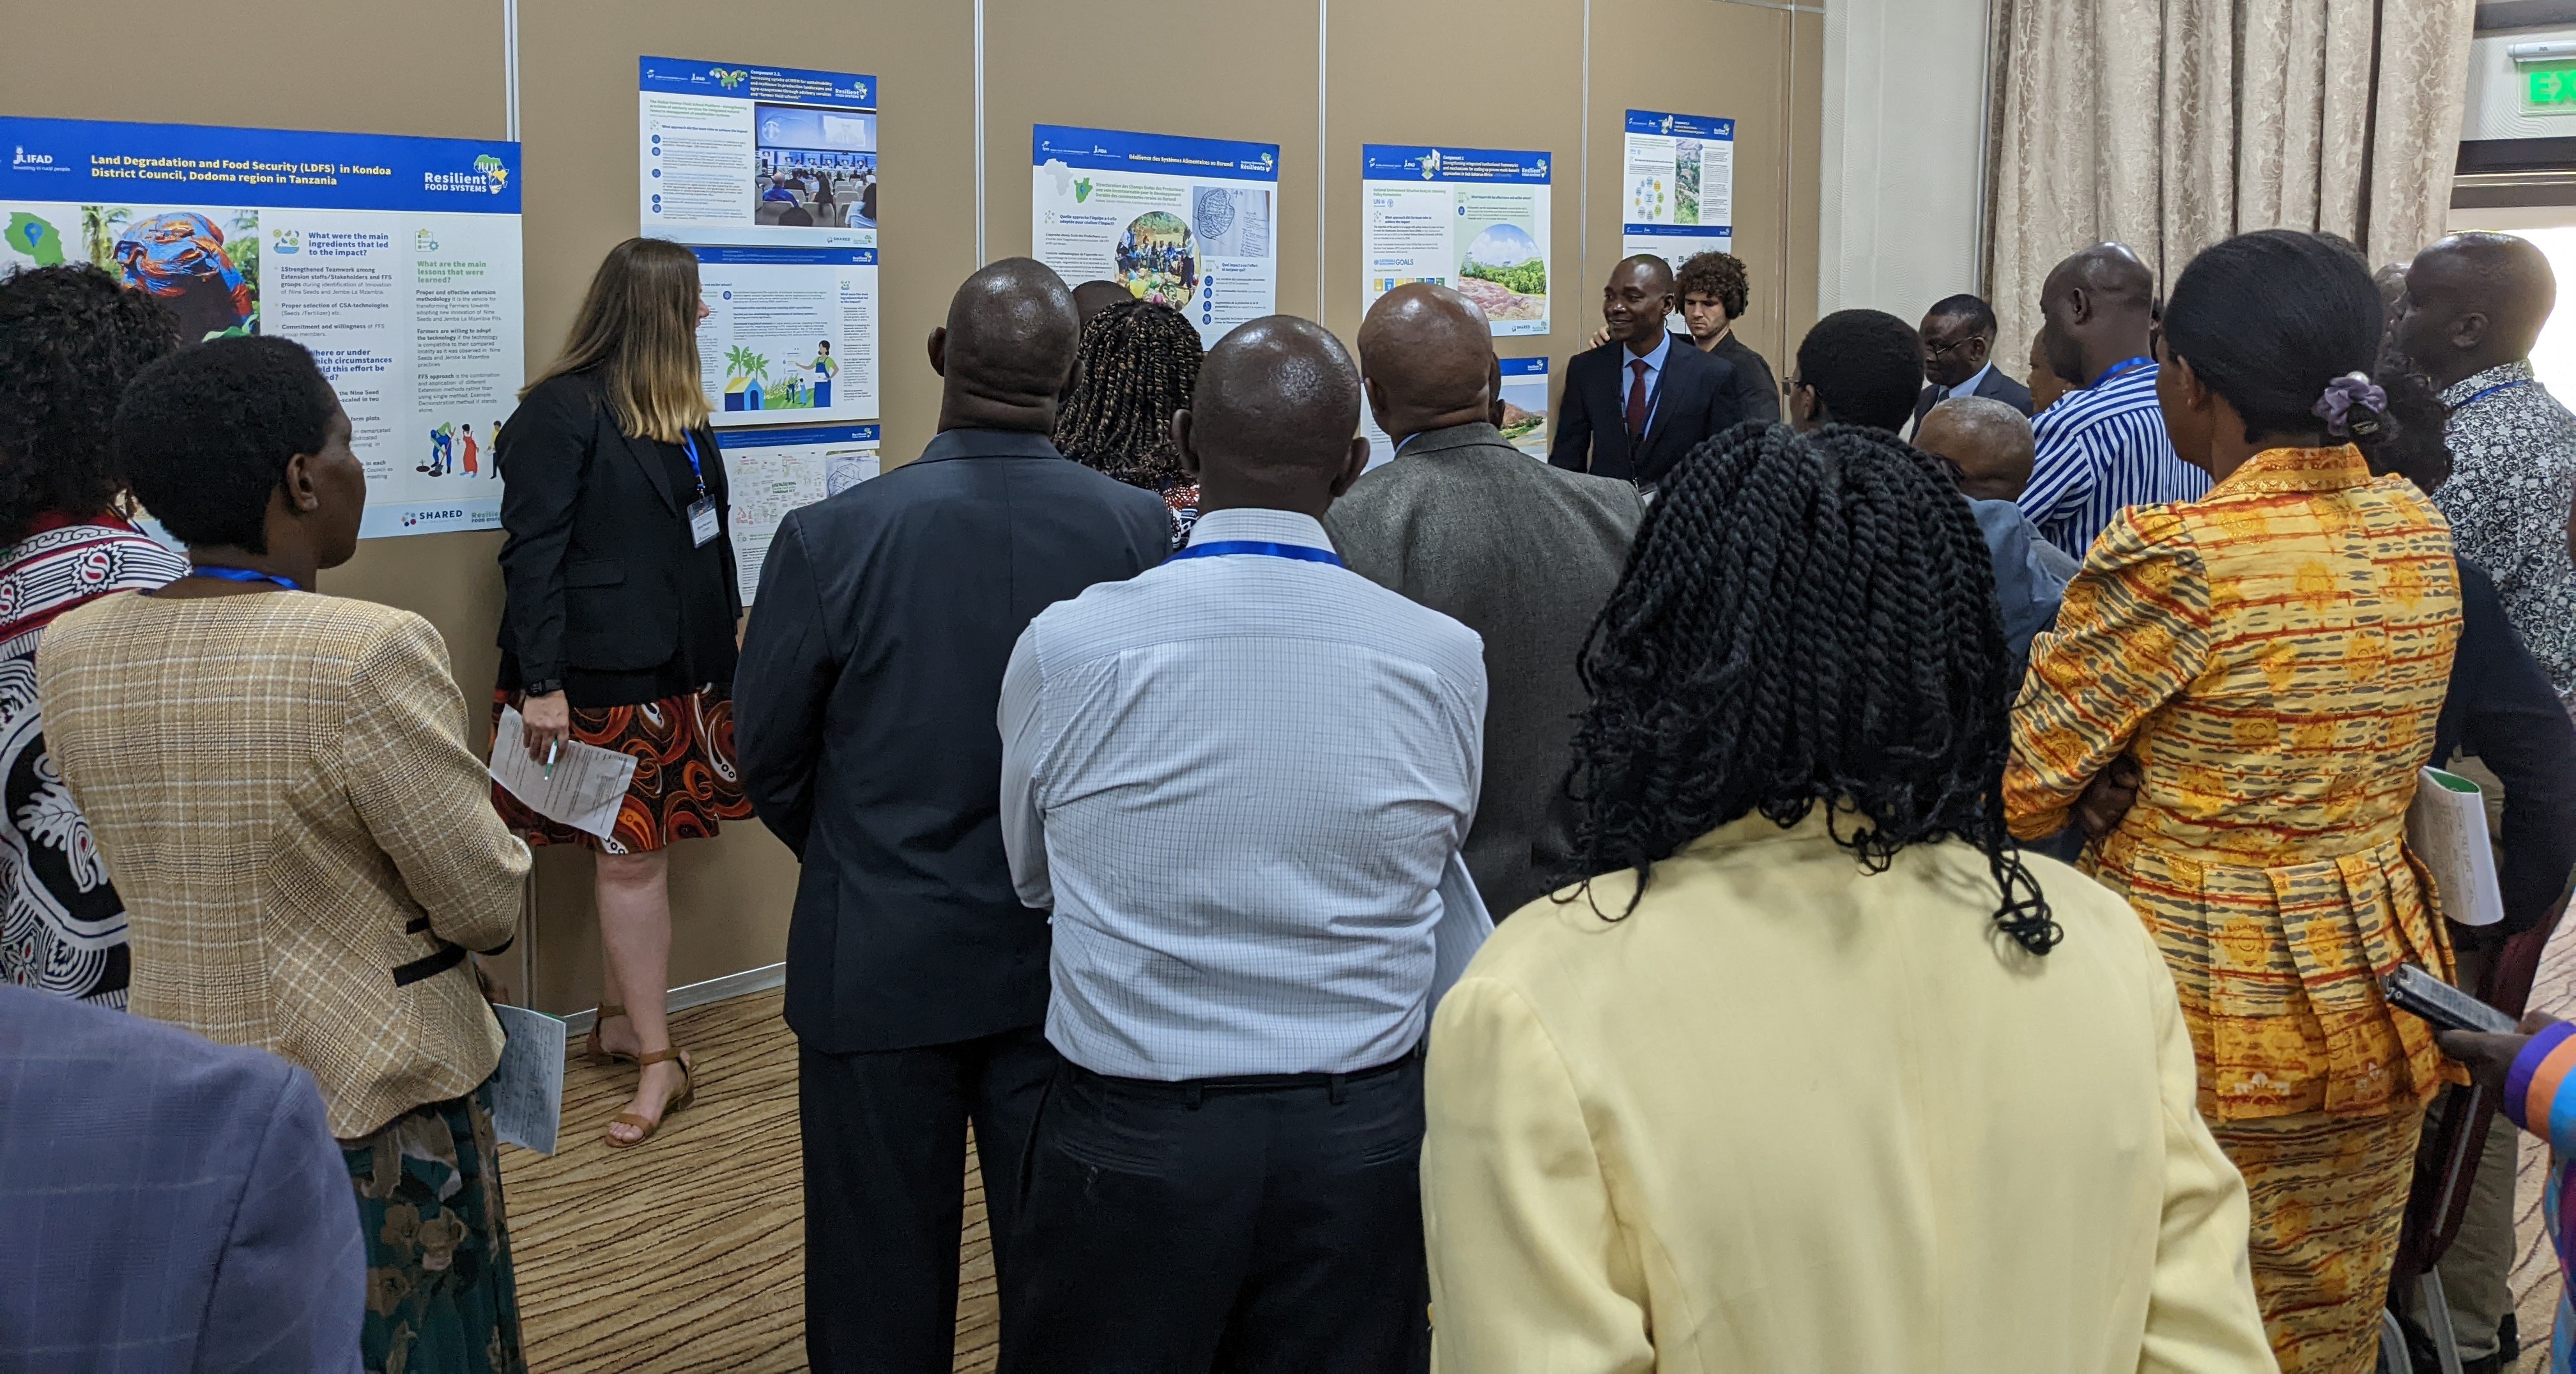 RFS projects communicated their results, impact and key lessons on an interactive experience wall. (c: ICRAF)